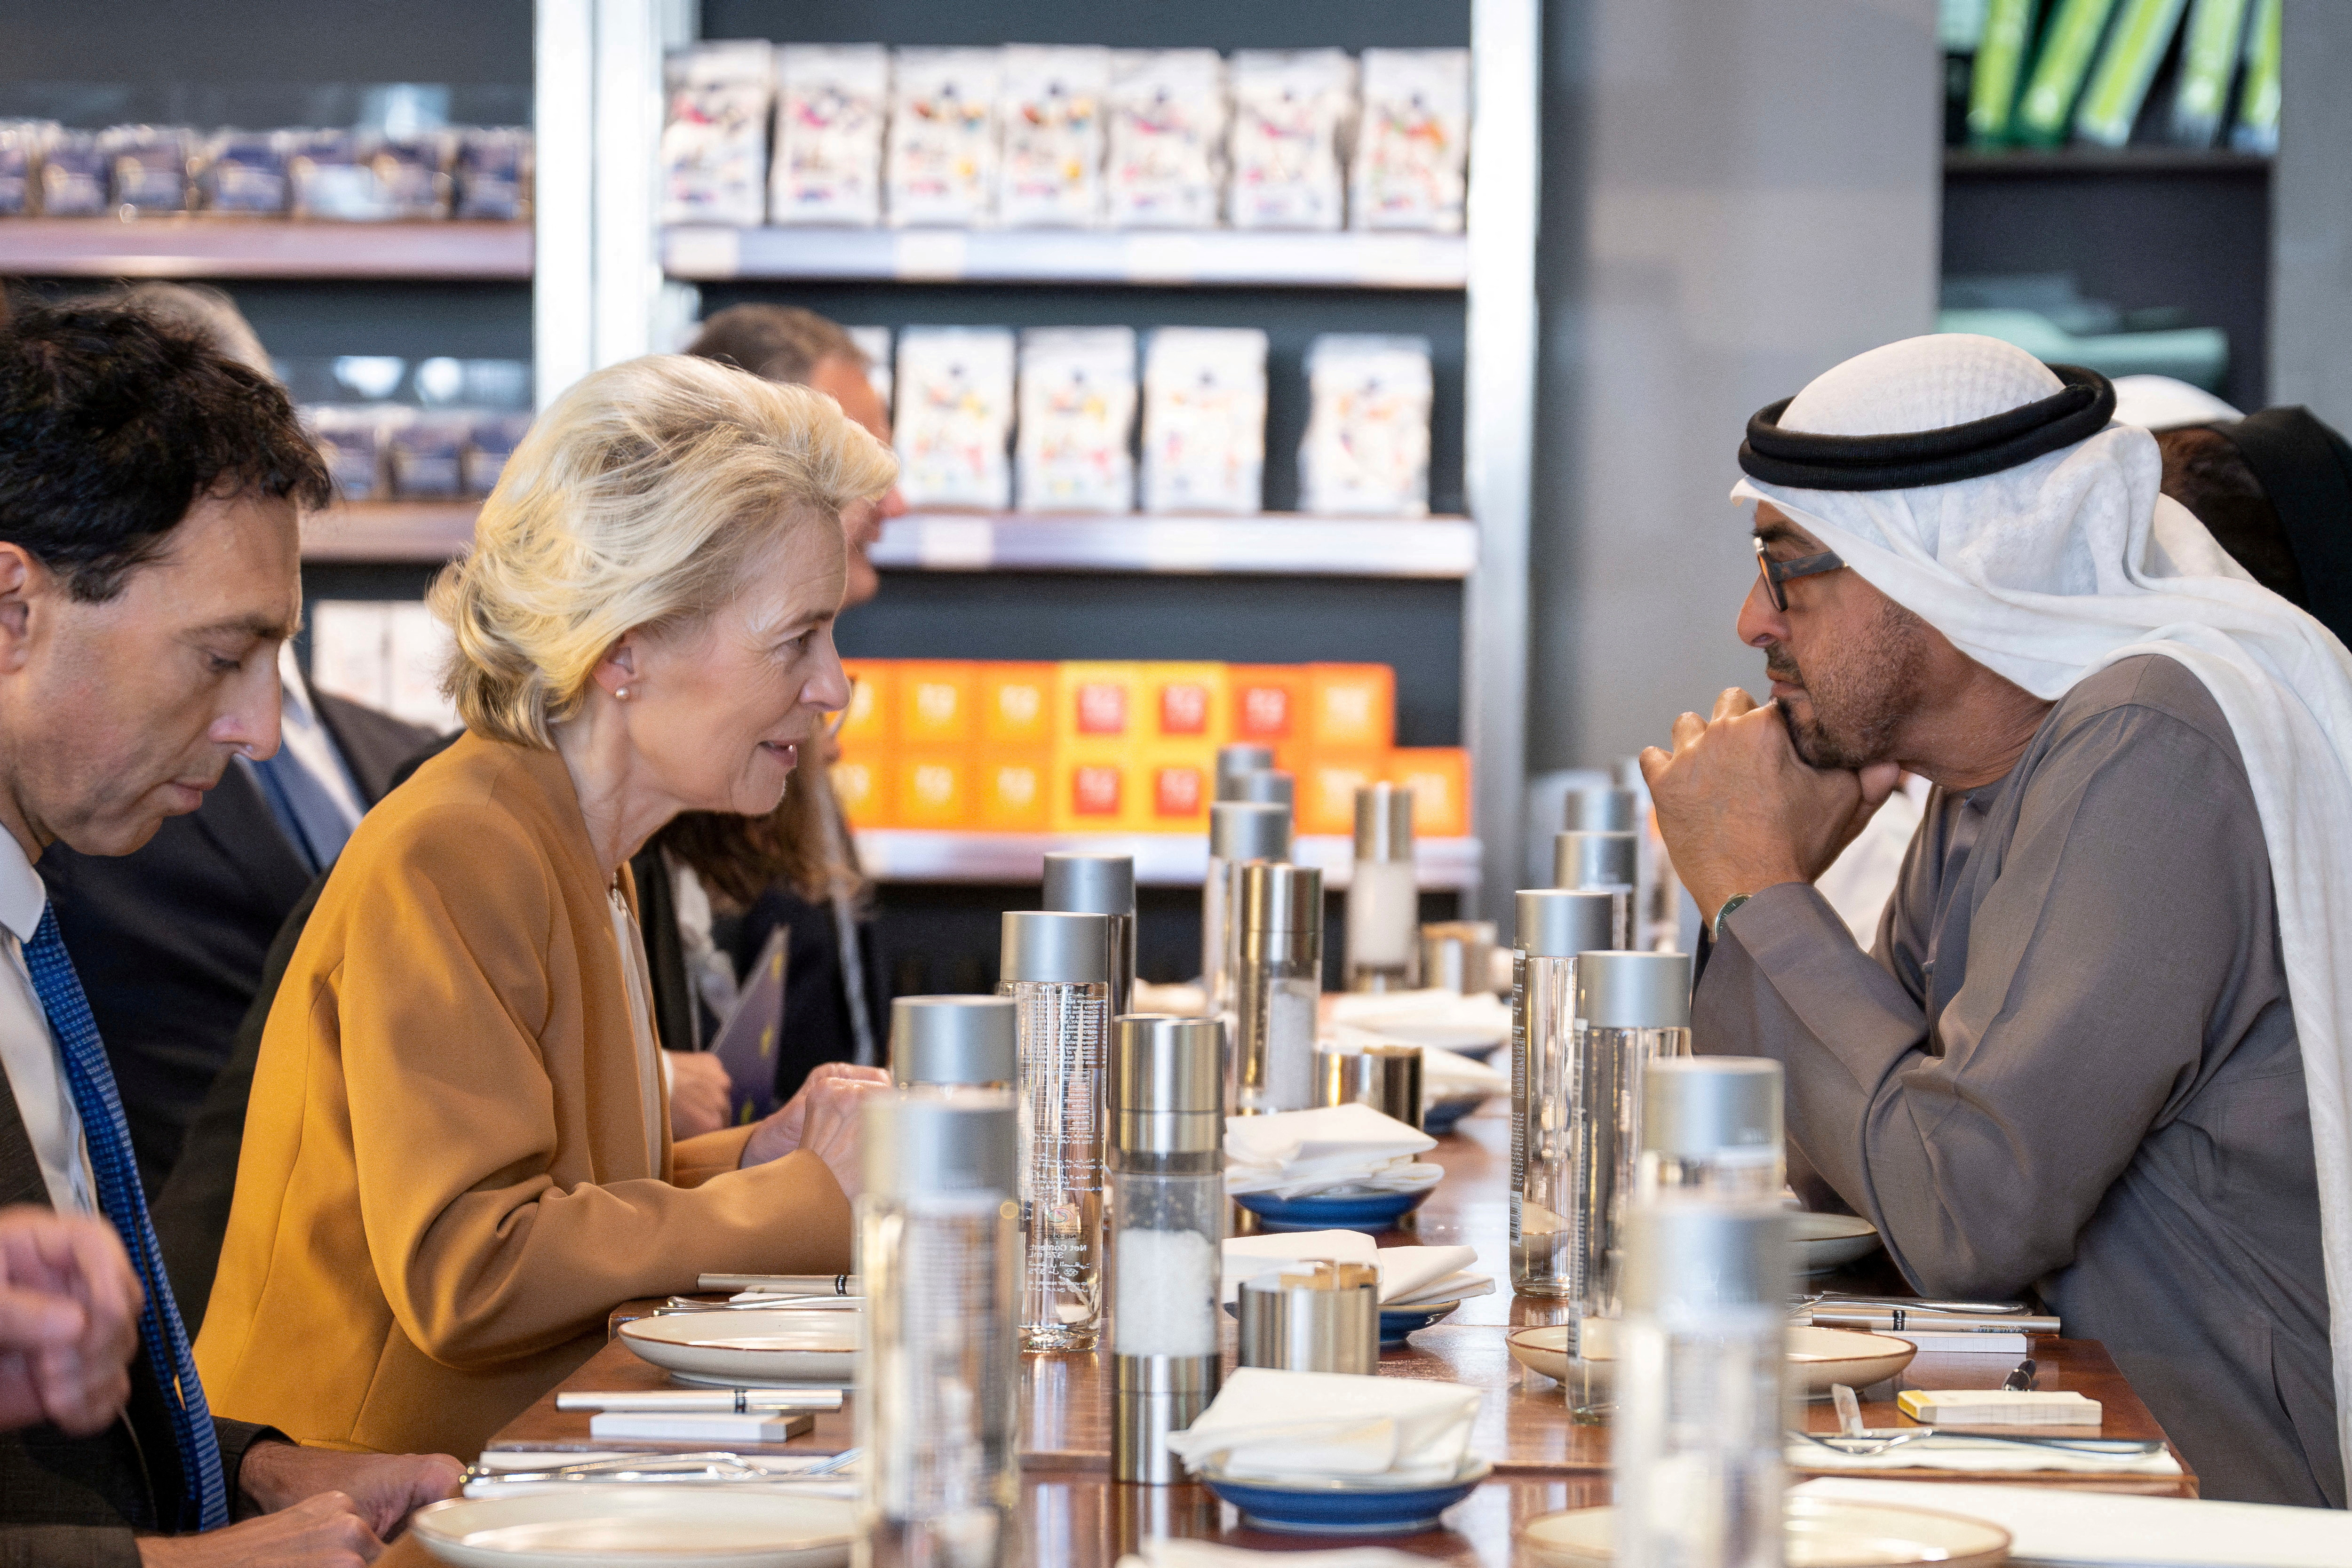 Sheikh Mohamed bin Zayed Al Nahyan, President of the United Arab Emirates, meets with Ursula von der Leyen, President of the European Commission in Abu Dhabi